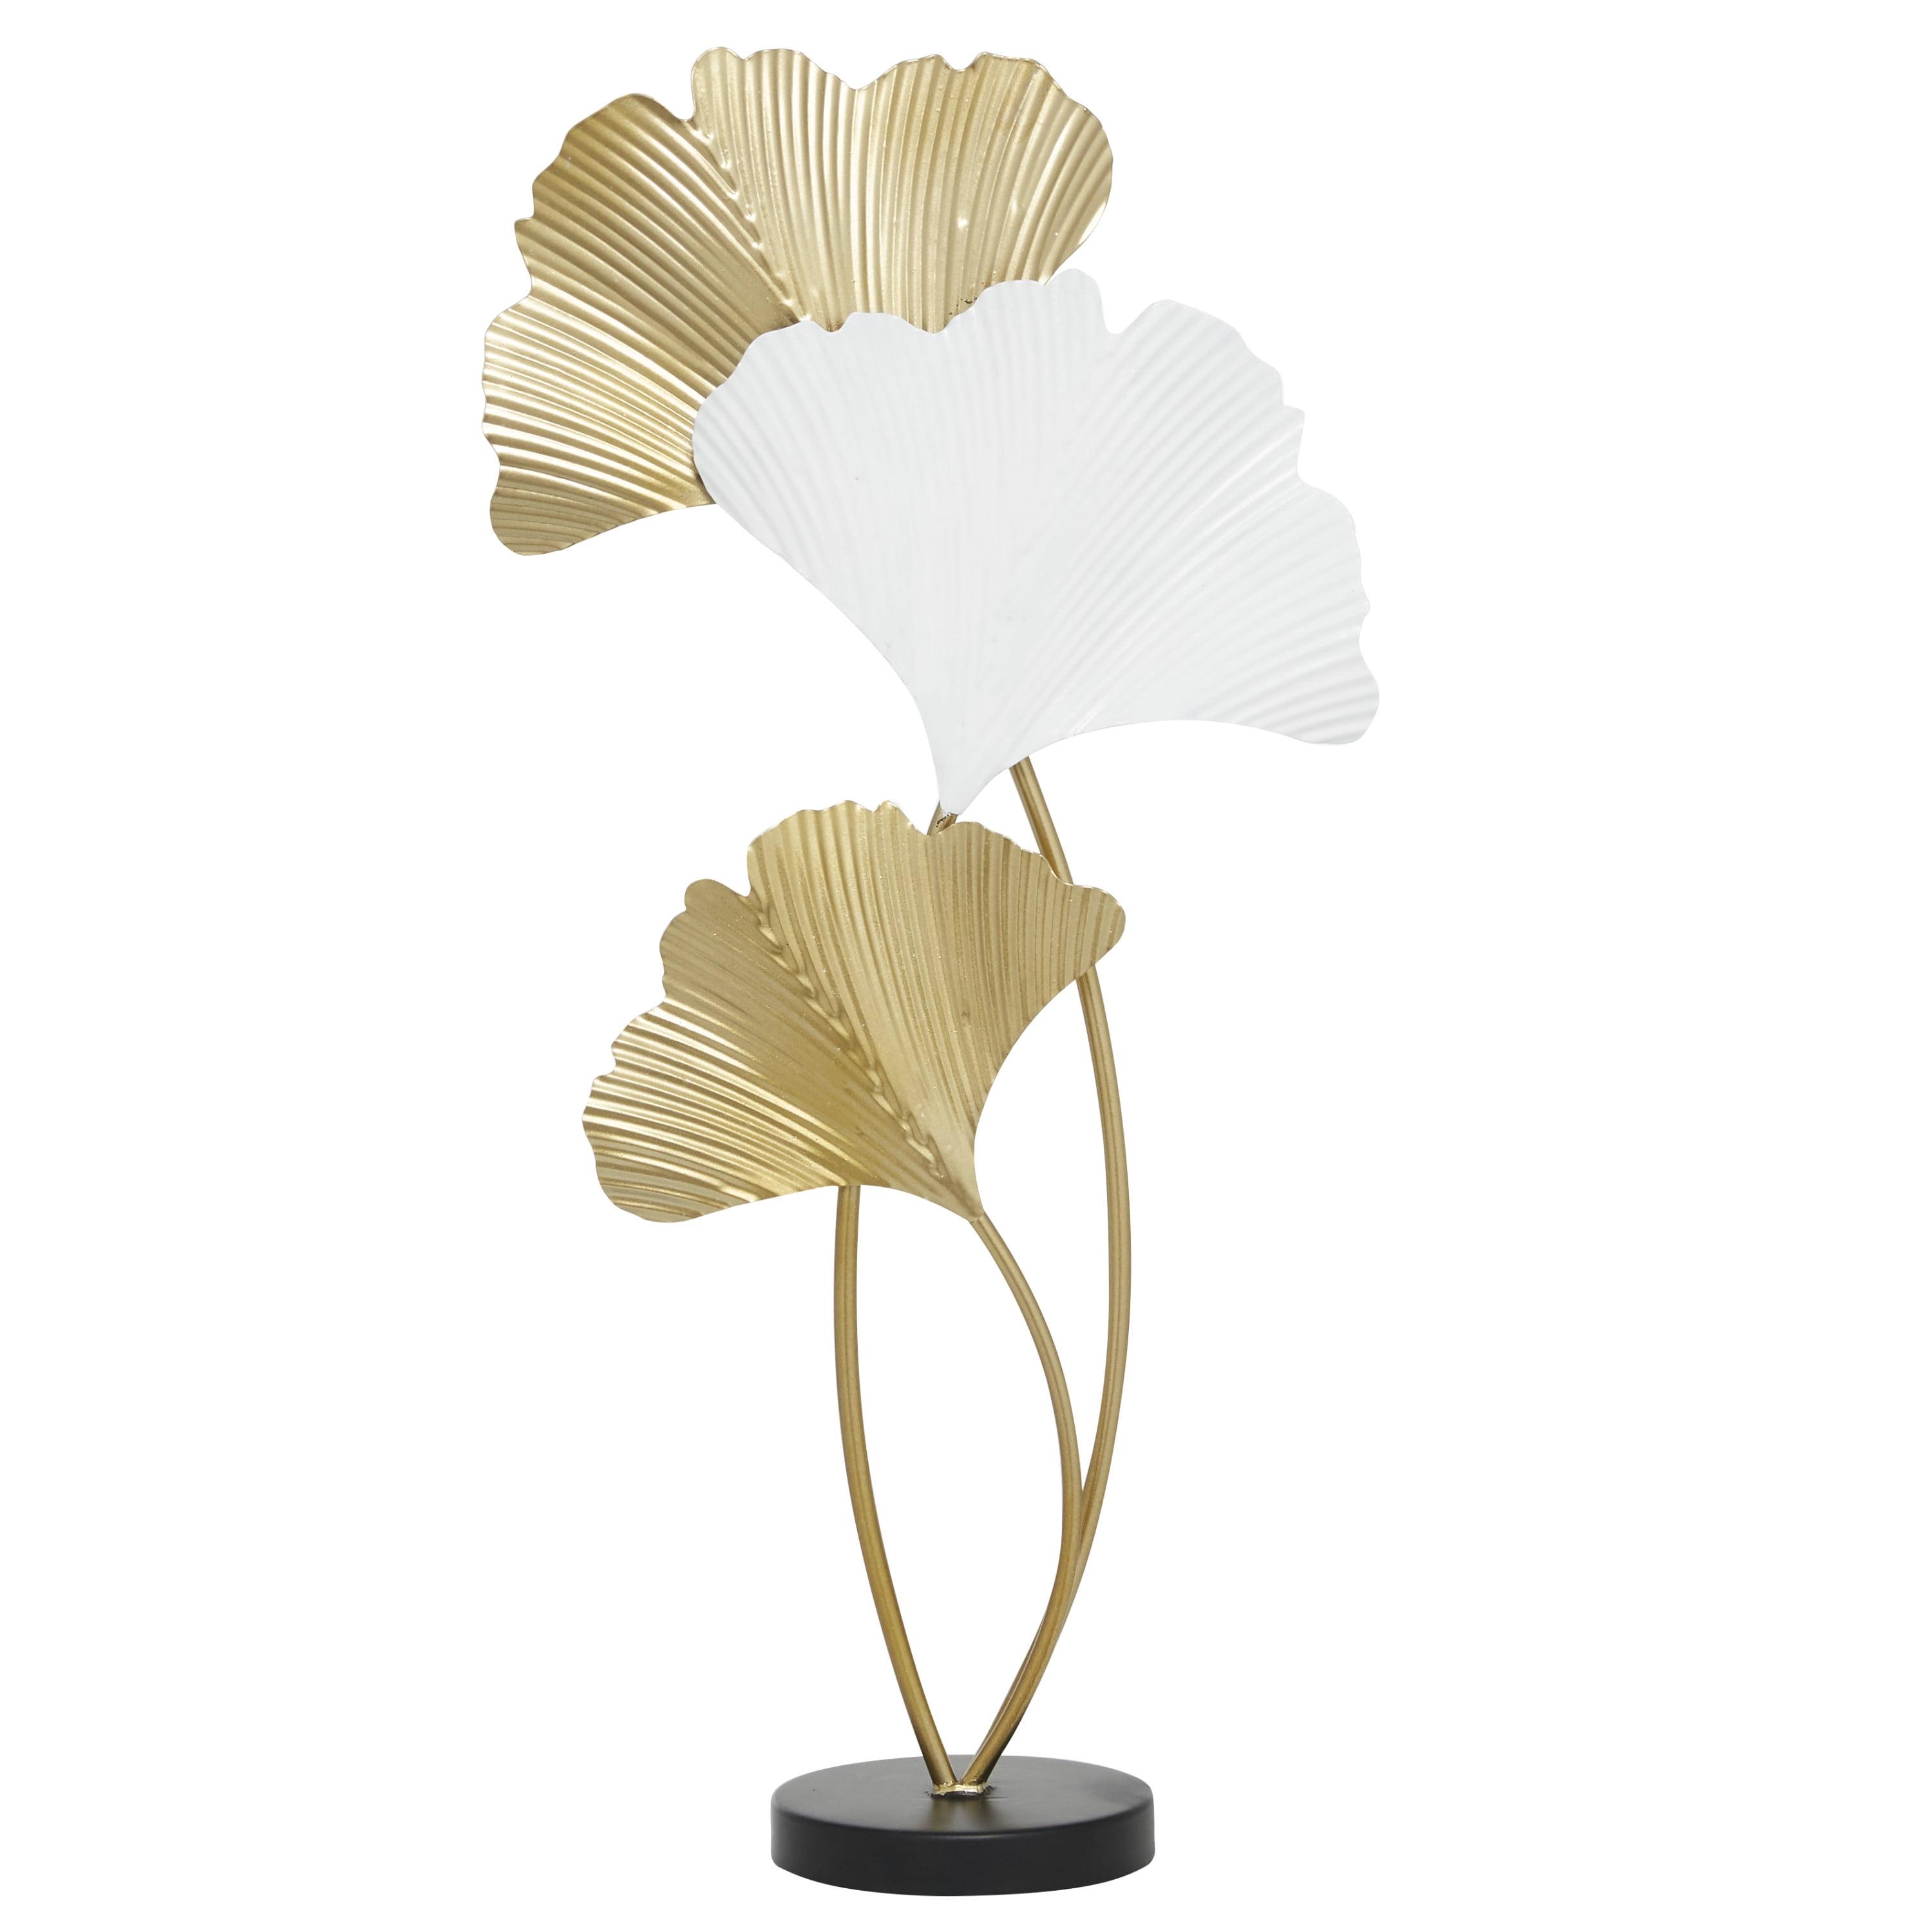 Staggered Ripple Leaf Fans Metal Table Sculpture in White & Gold